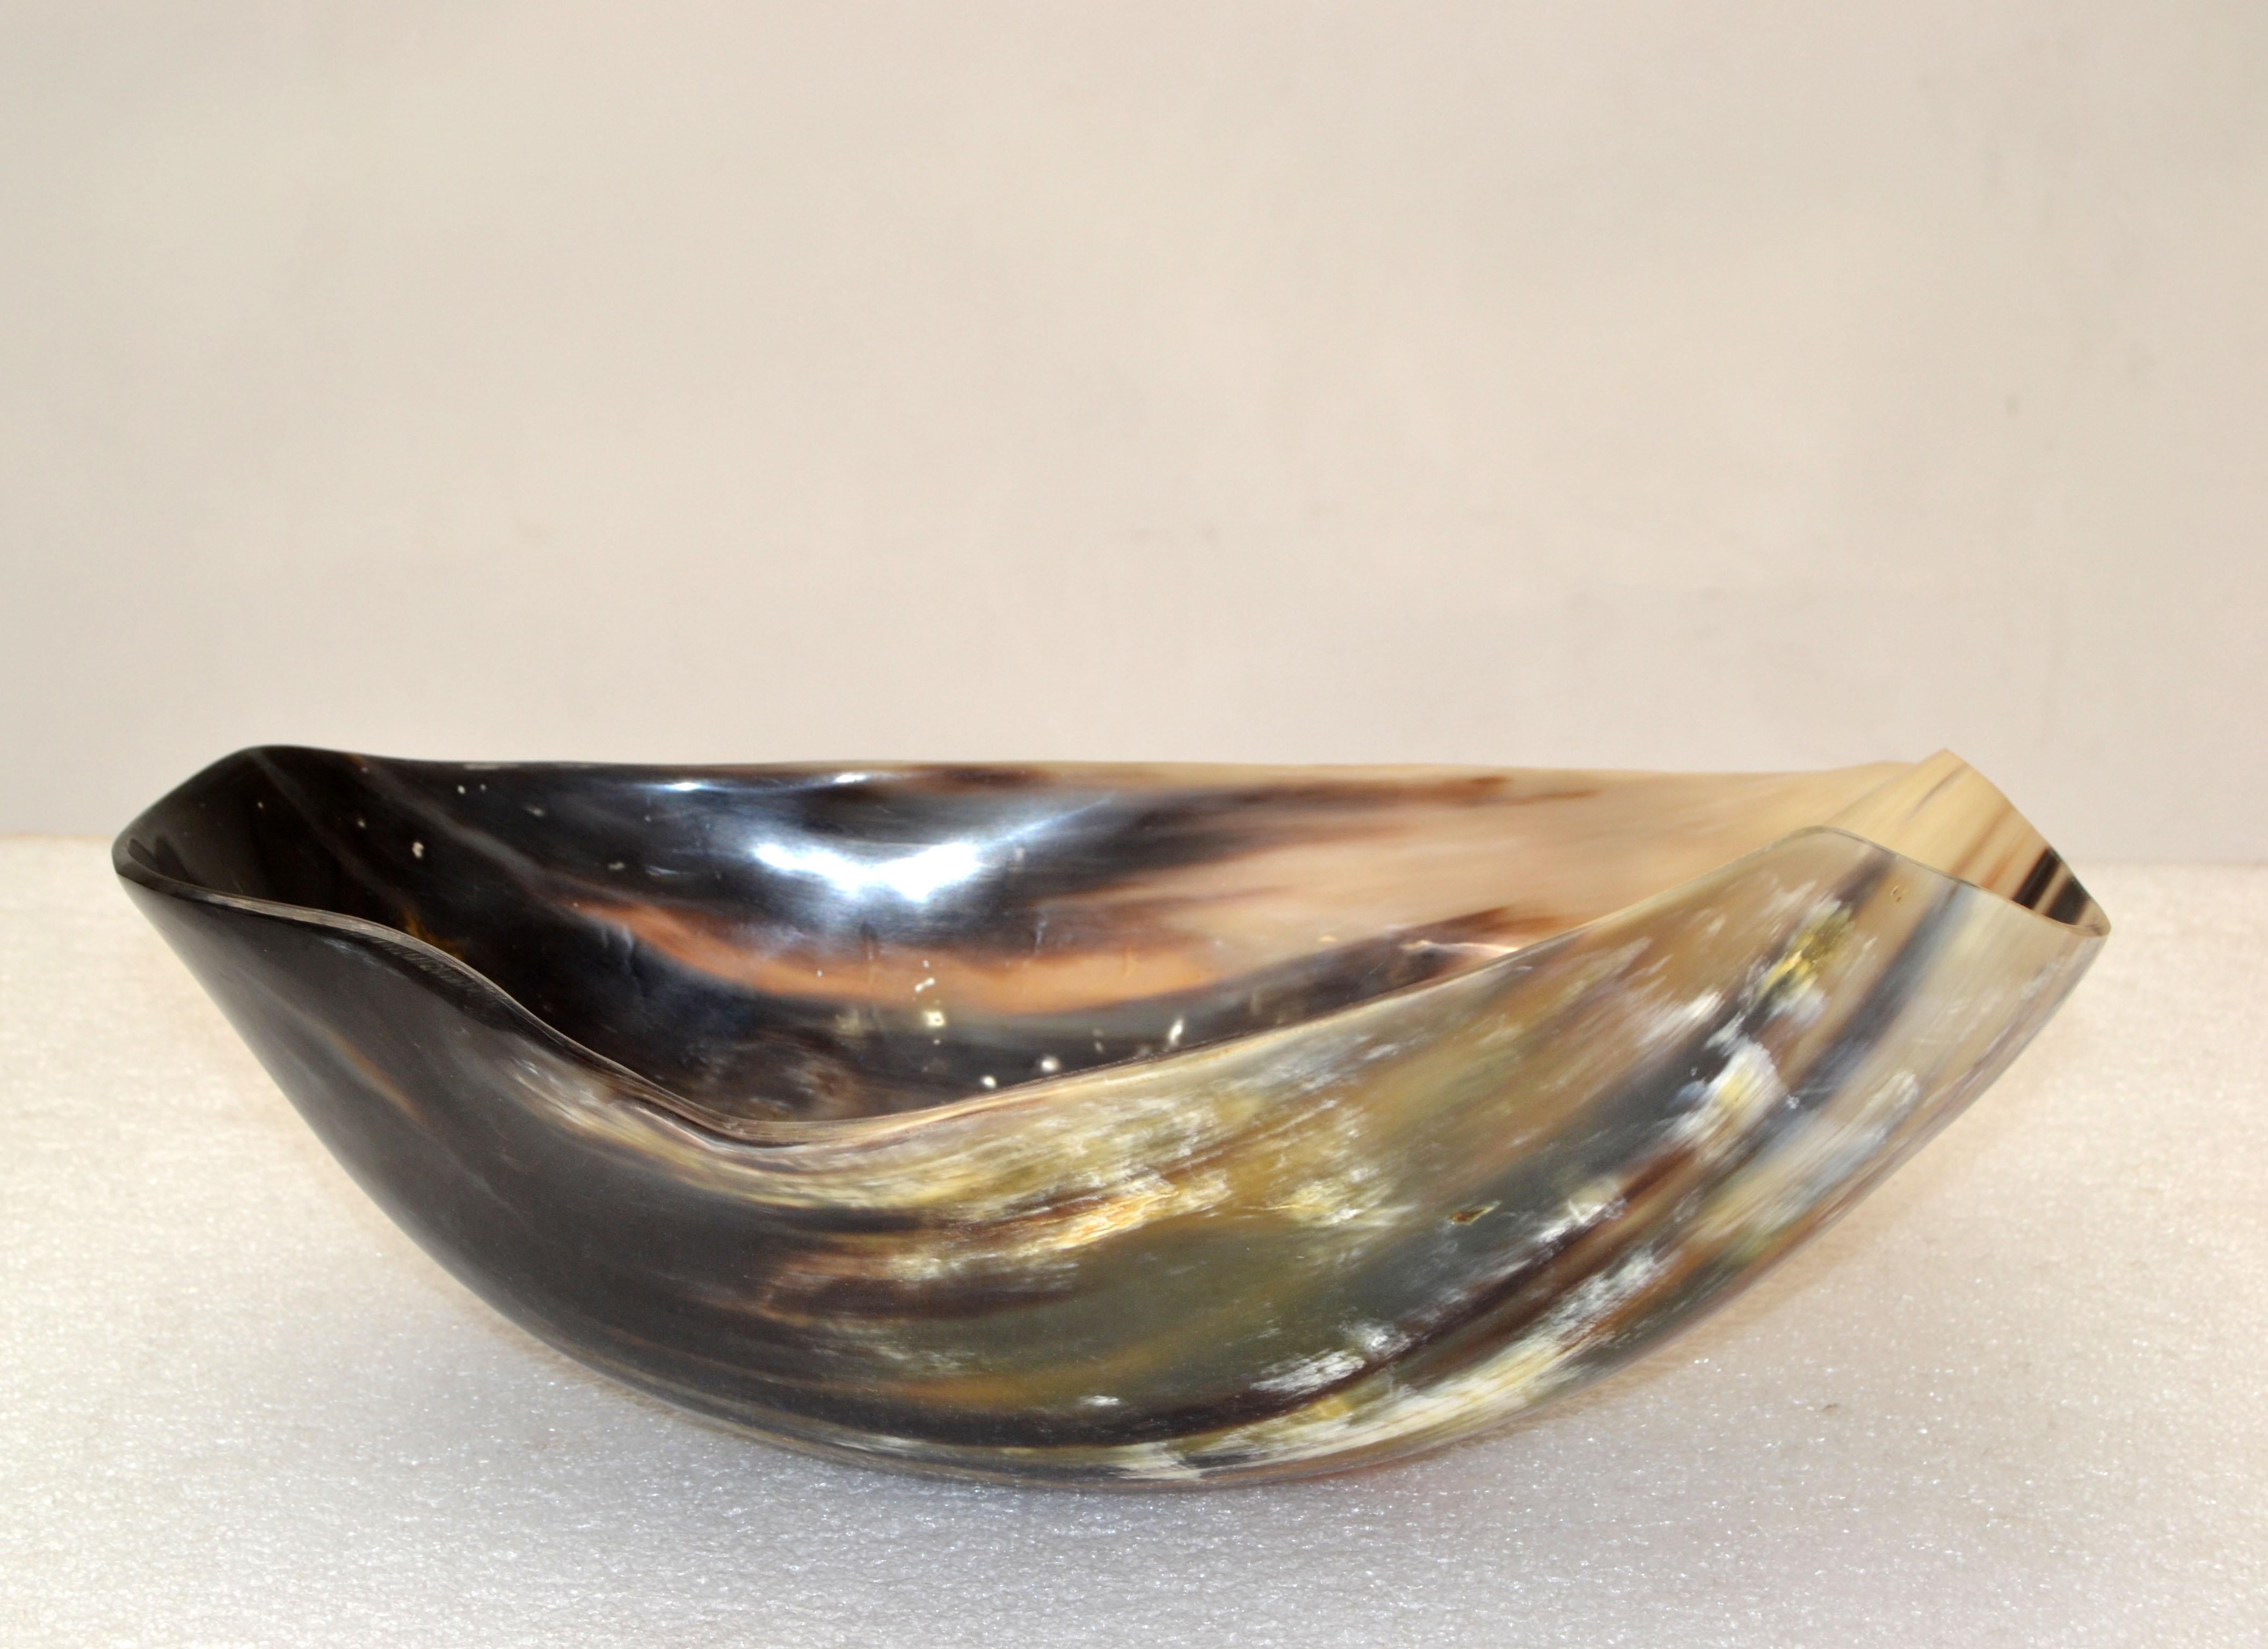 Polished Handmade Horn Bowl, Catchall, Vessel, Centerpiece Mid-Century Modern For Sale 1